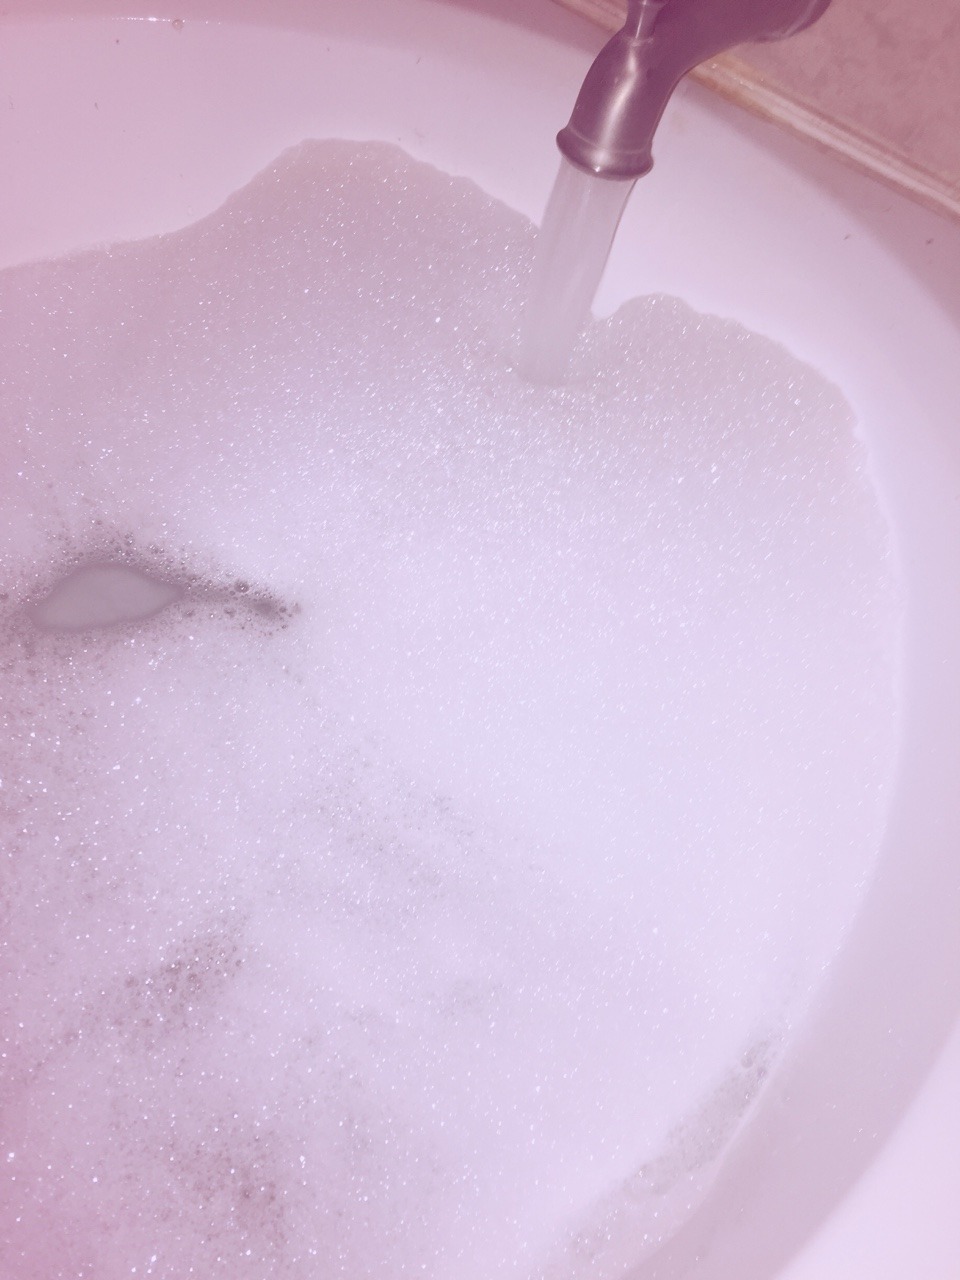 Grouchy princess needed a warm bath to relax.